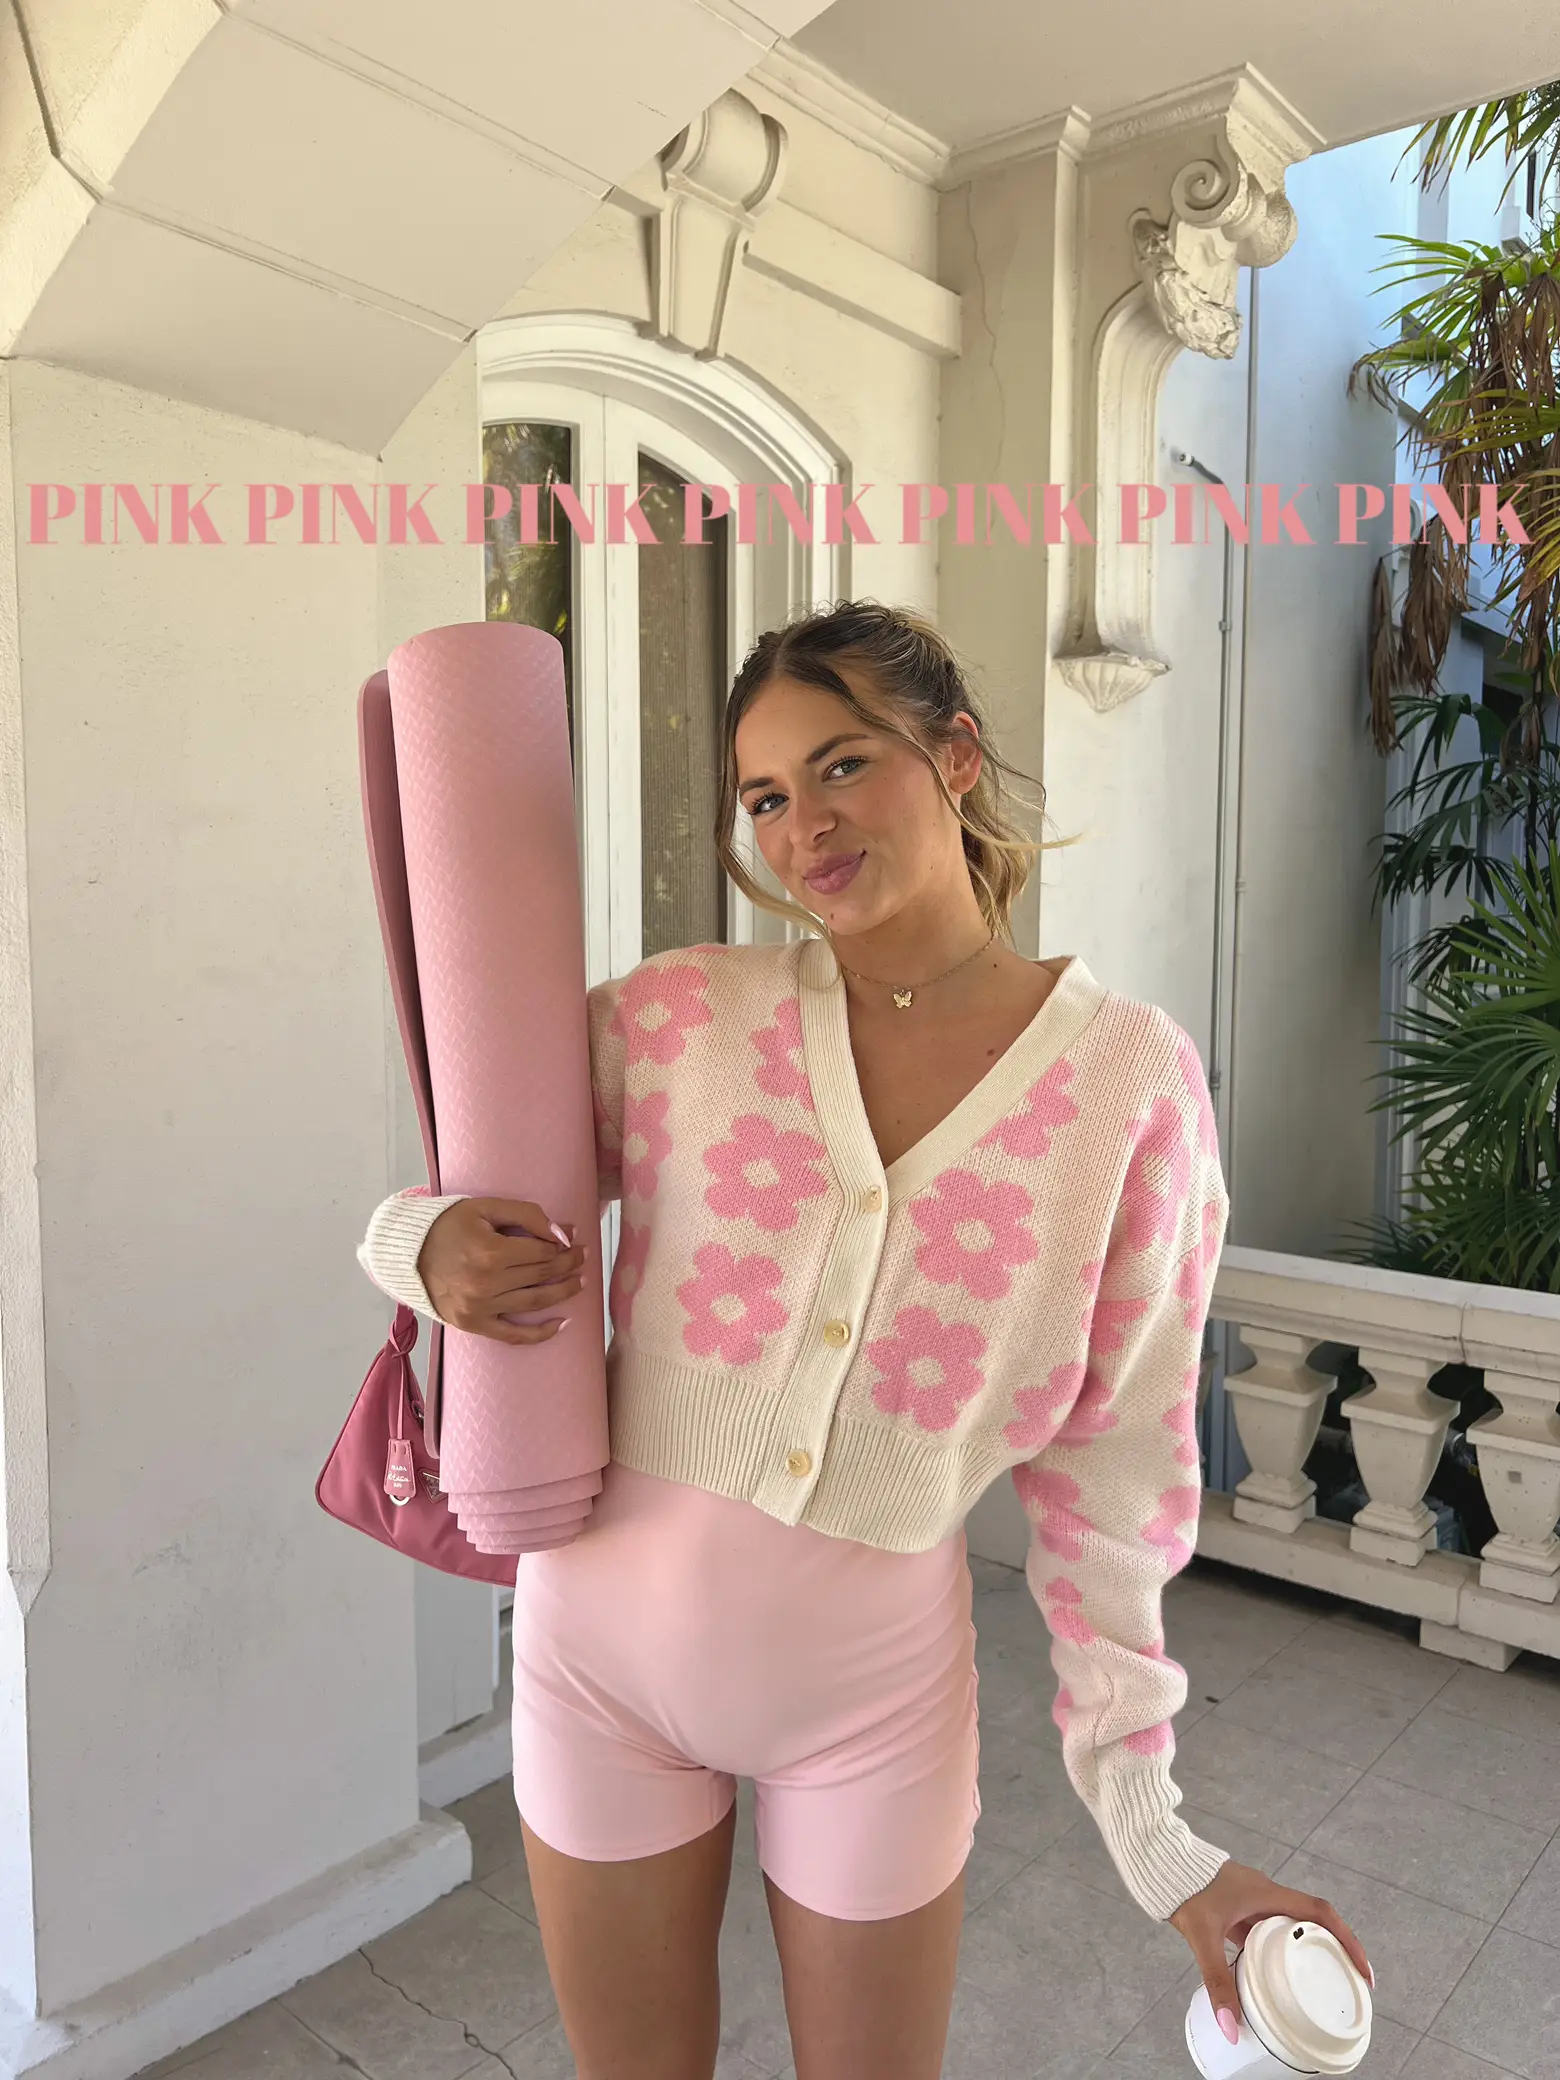 Outfit Inspo: Pink Pilates Princess 🩰💞, Gallery posted by MORGAN DIÓNNE